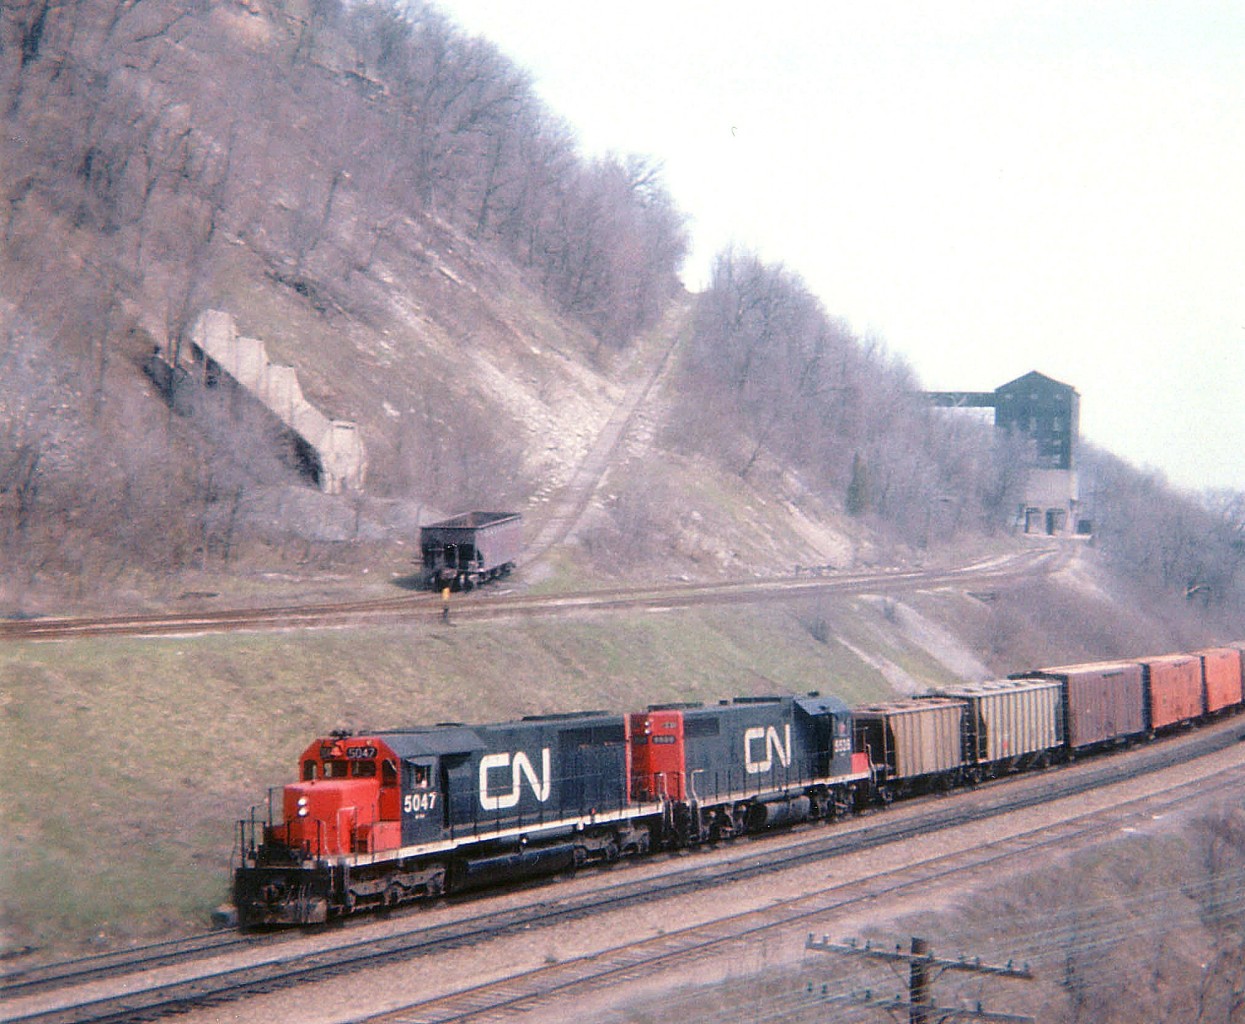 CN 5047, 5525 westbound pass the old Canada Crushed Stone Ltd facility near mile 4, Dundas Sub. This image, while a tad grainy, shows a rather open view of the old rail siding which led up to the large screen house . Operations before shutting down in the early 1970s consisted of stone quarried up on the mountain brow (Dundas Peak)going thru the High Brow Crusher (demo'd 1975) and then down to the Screen House (demo'd 1993)and then over the CN mainline via the gantry (demo'd 1986)conveyer belt and stockpiled on the south side for later shipping. Interesting in this image is the hopper at the base of the incline trackage. This steep grade operated by cable pulling cars up the grade, supplies usually went this way. Perhaps this car was held back for use in removal of some equipment as the shutdown was finalized. Steetley Inc., which purchased the CCSL in 1951, maintained a small shipping facility south of the tracks until the early 1980s. Walking the area today, it is hard to imagine the landscape being so open. All that remains now is the incline bed, which is now a hiking trail; all rail is gone but a lot of old ties remain.